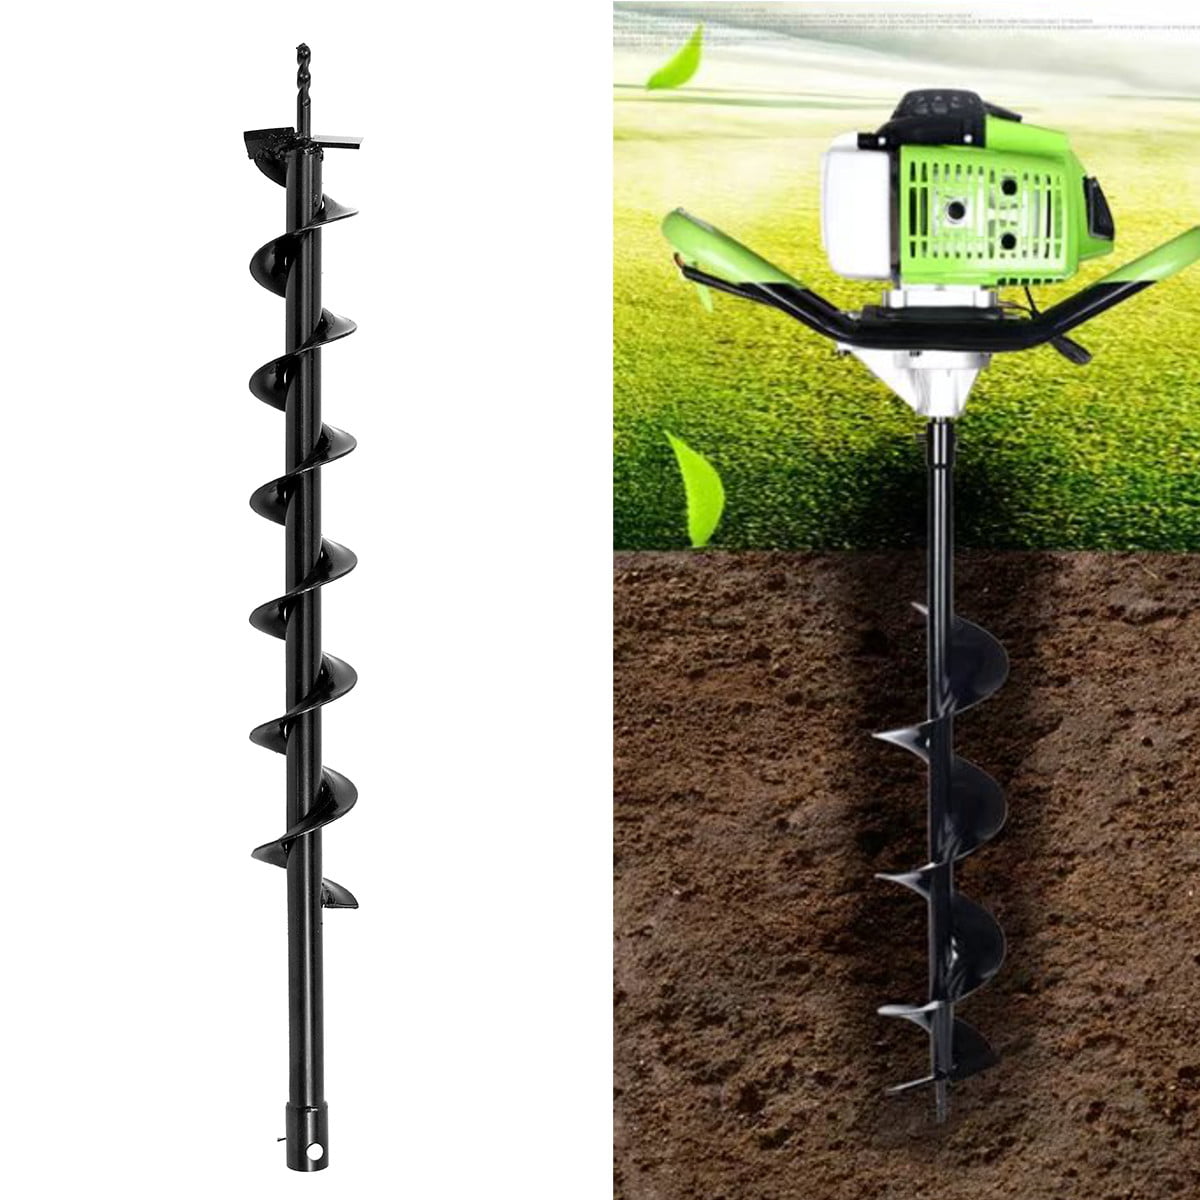 Dia Garden Auger Drilling Digging Hole Drill Bits Tools 9 Inch Seedlings New